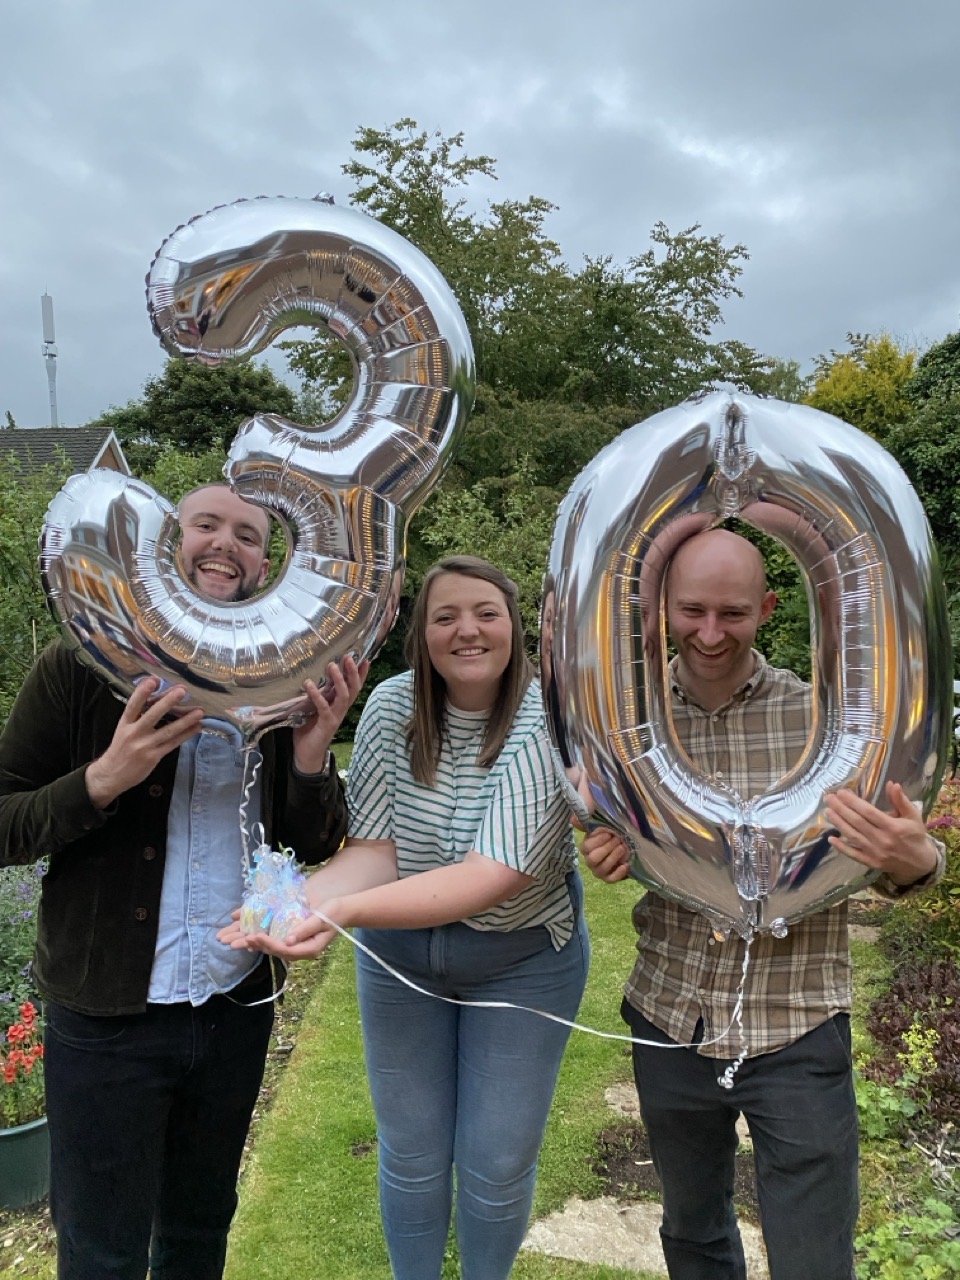 Me, Alison and JW with balloons that say 30.